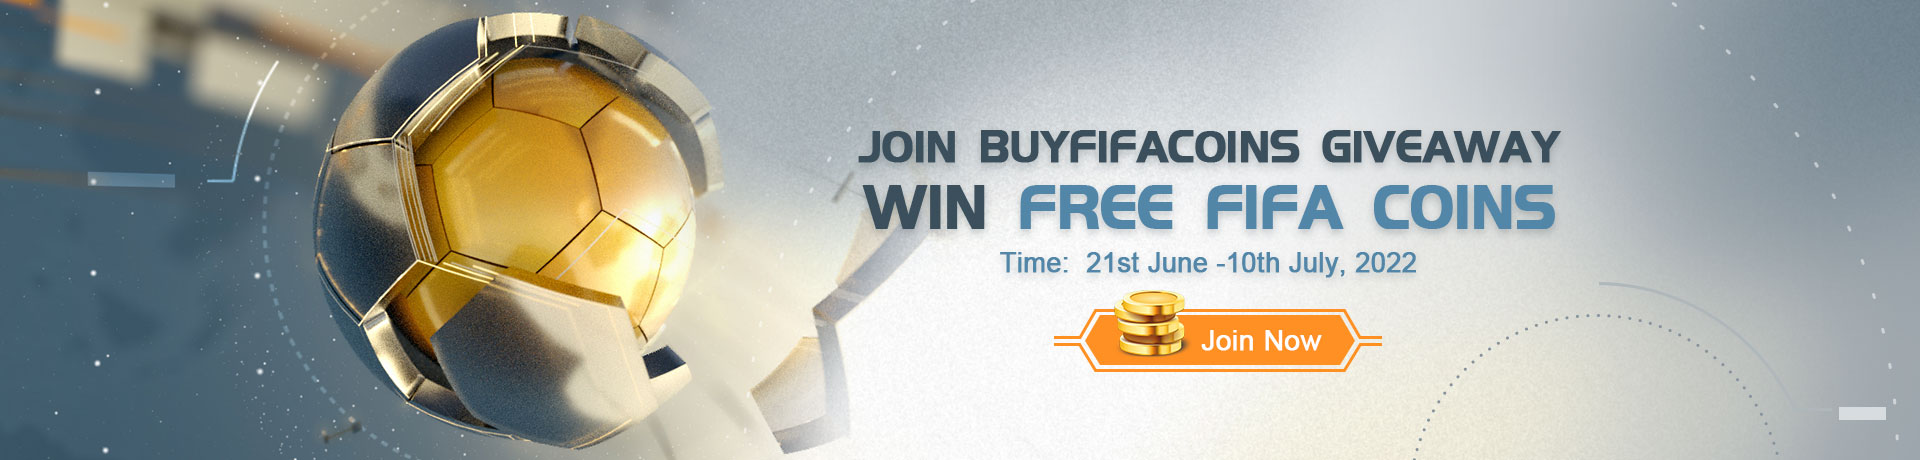 Join Buyfifacoins Giveaway, Win Free FIFA Coins